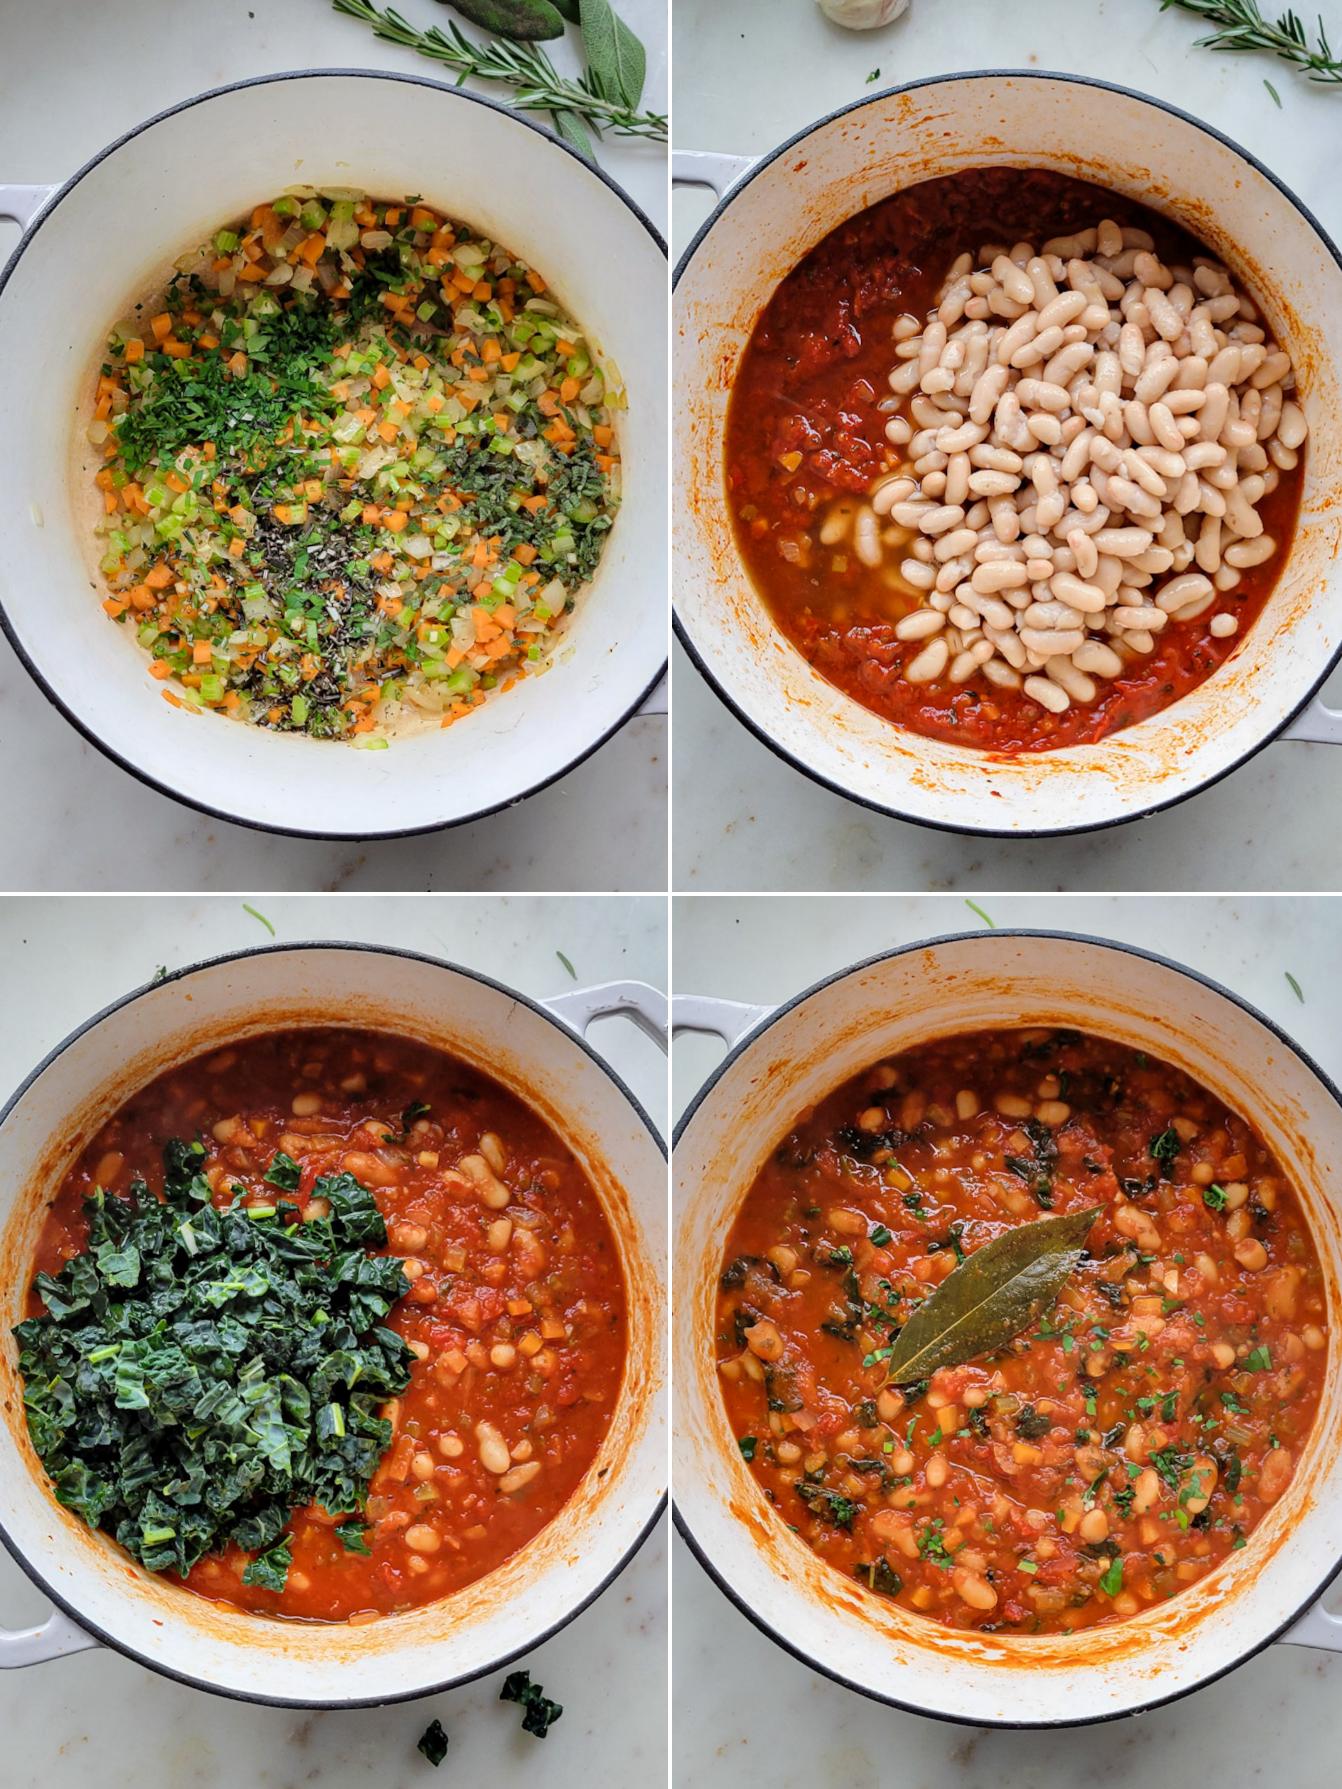 Collage showing the making of Tuscan Braised Beans and Kale